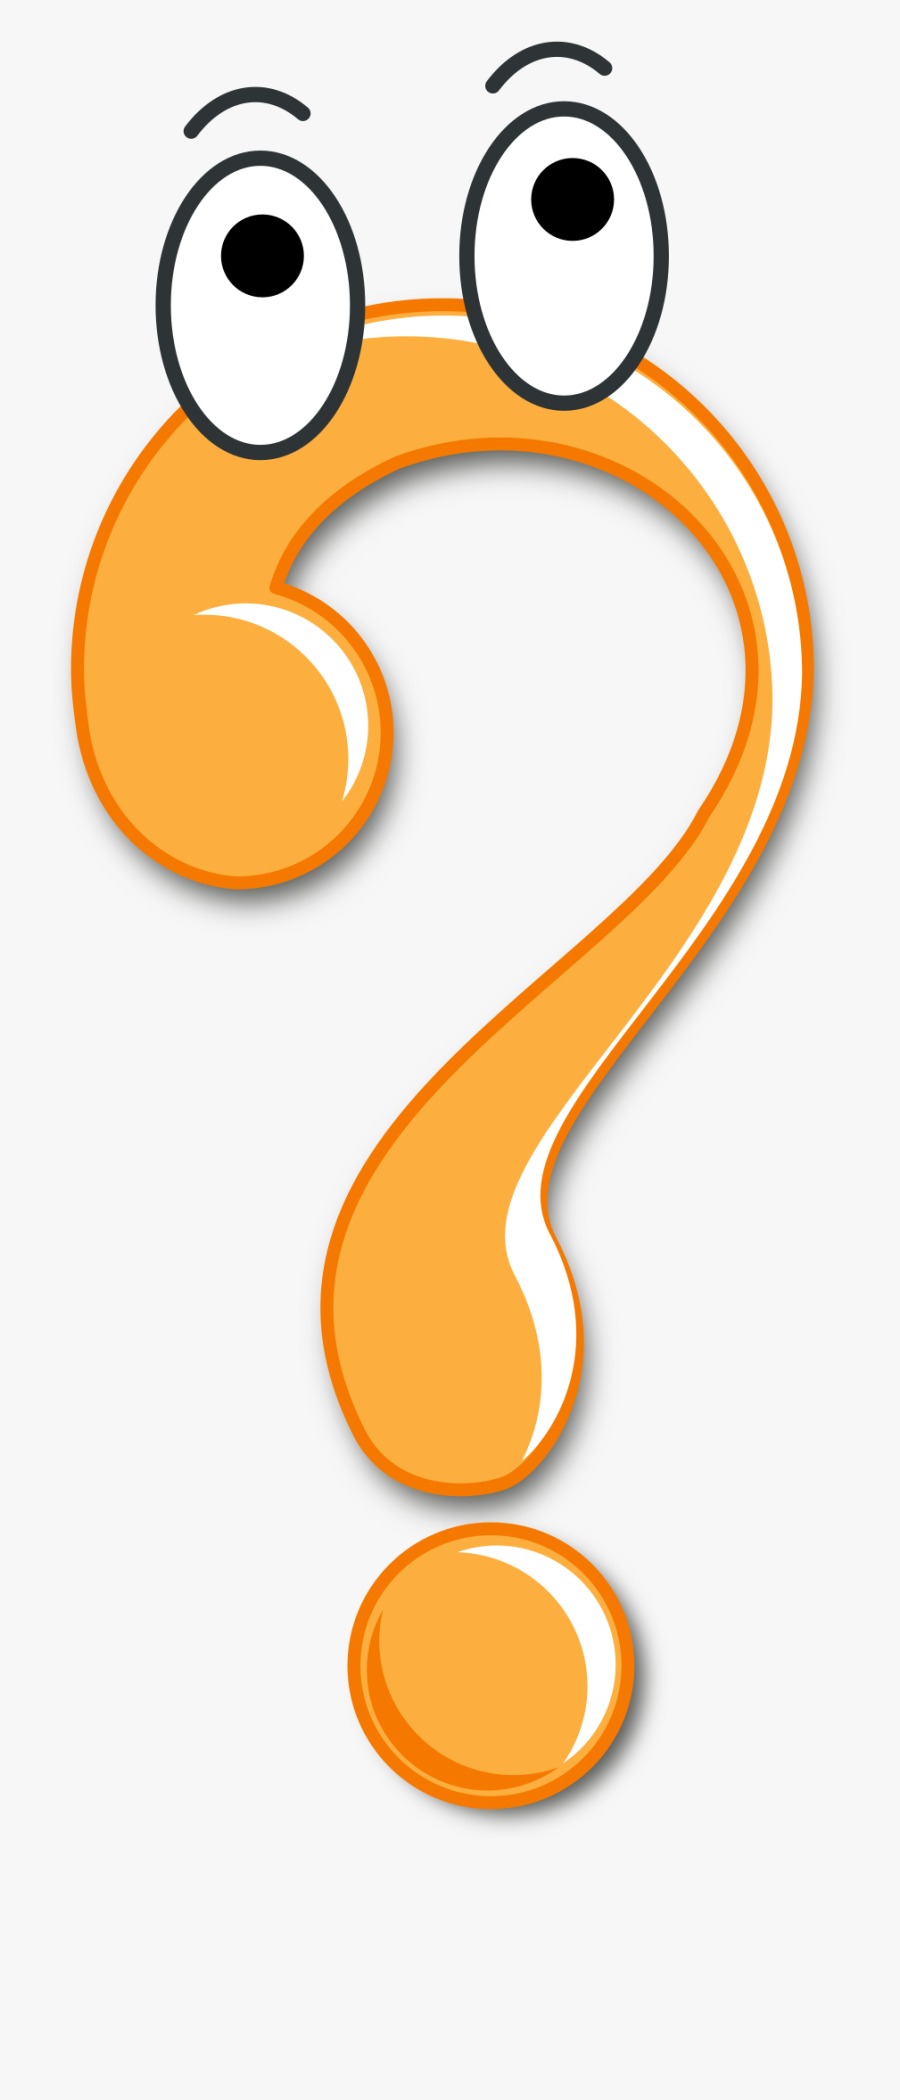 Thumb Image - Transparent Animated Question Mark, Transparent Clipart